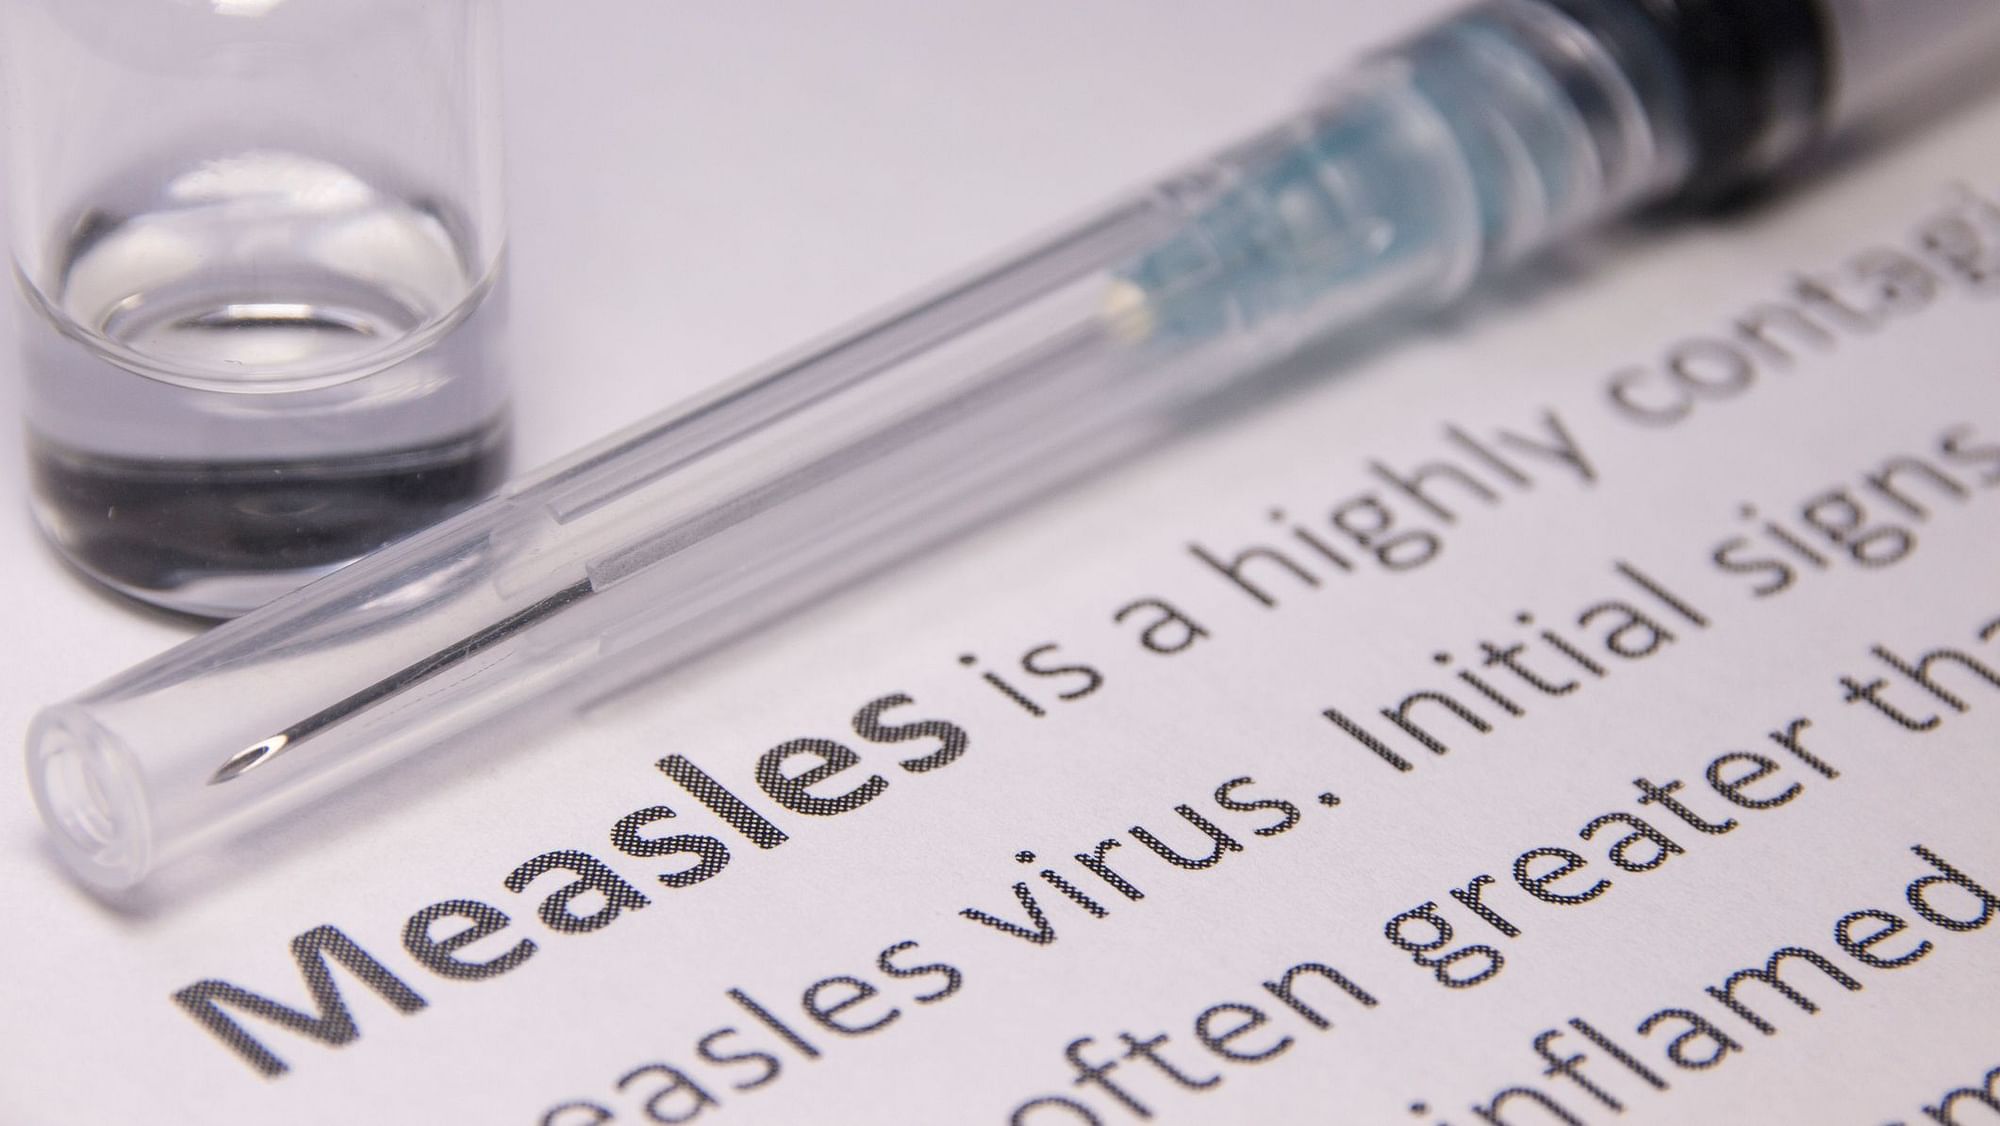 Measles cases rose 300 percent worldwide through the first three months of 2019 compared to the same period last year.